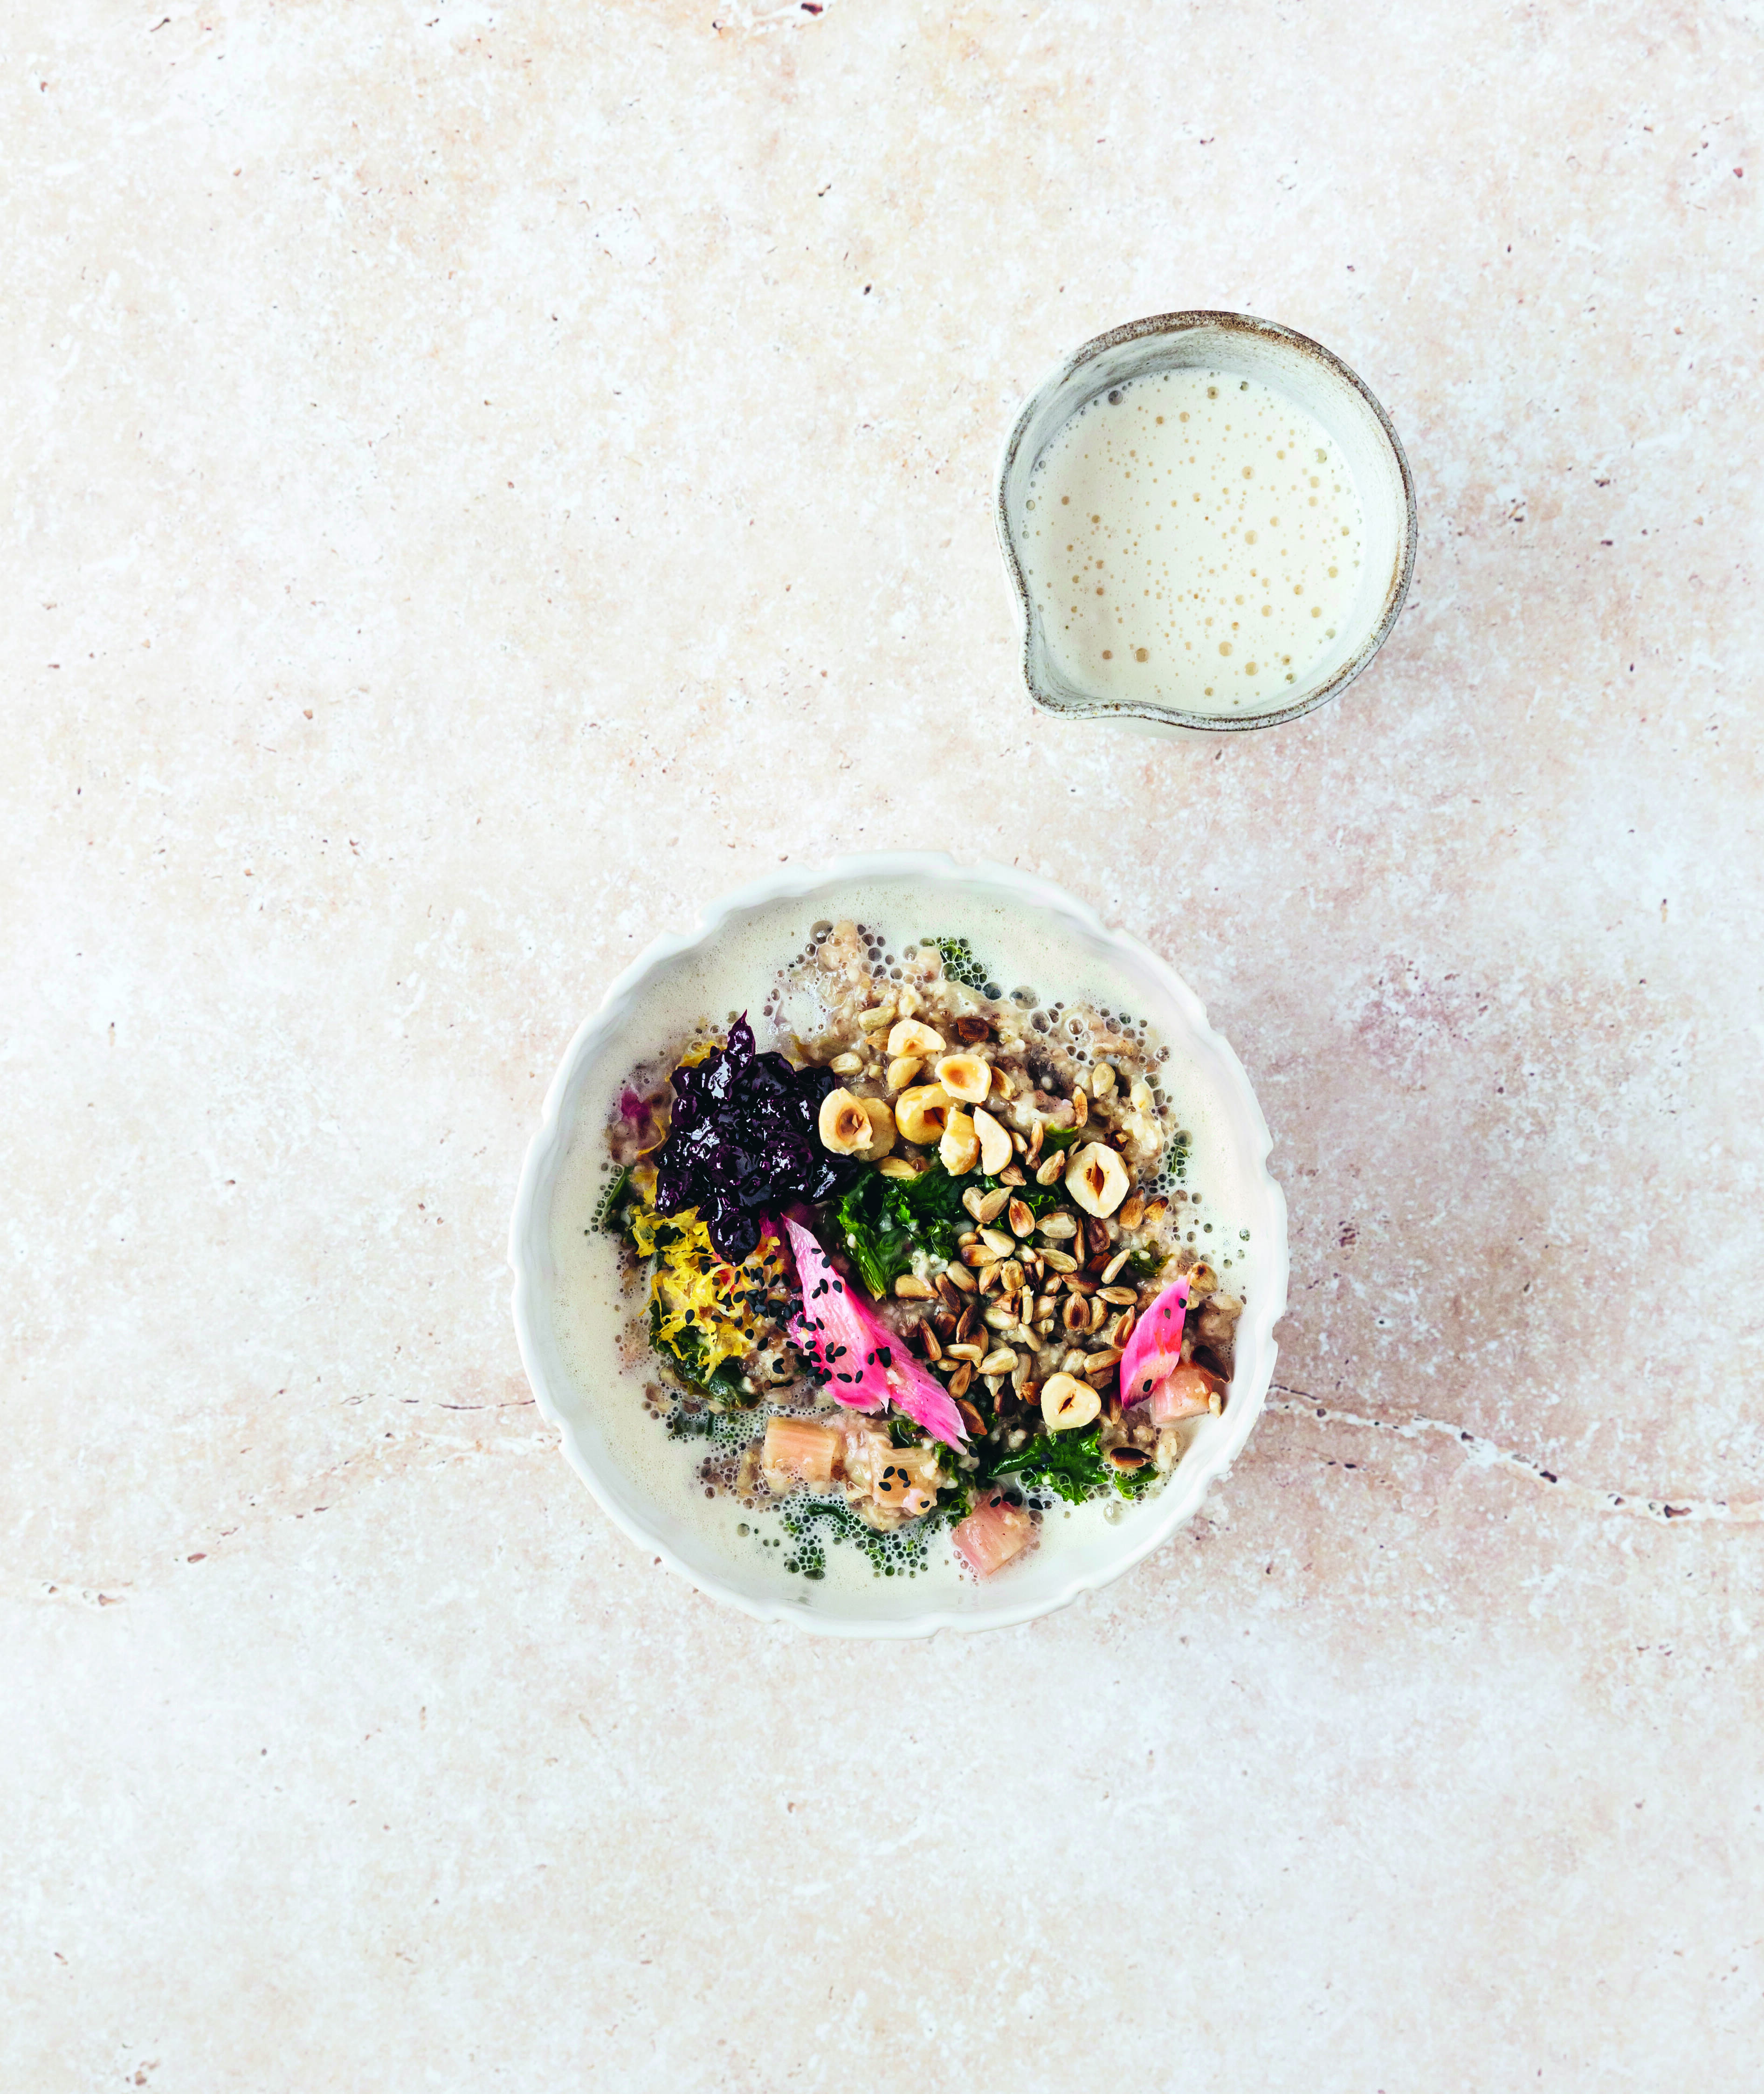 oat porridge with rhubarb, kale, and cardamom, from Vegan at Home